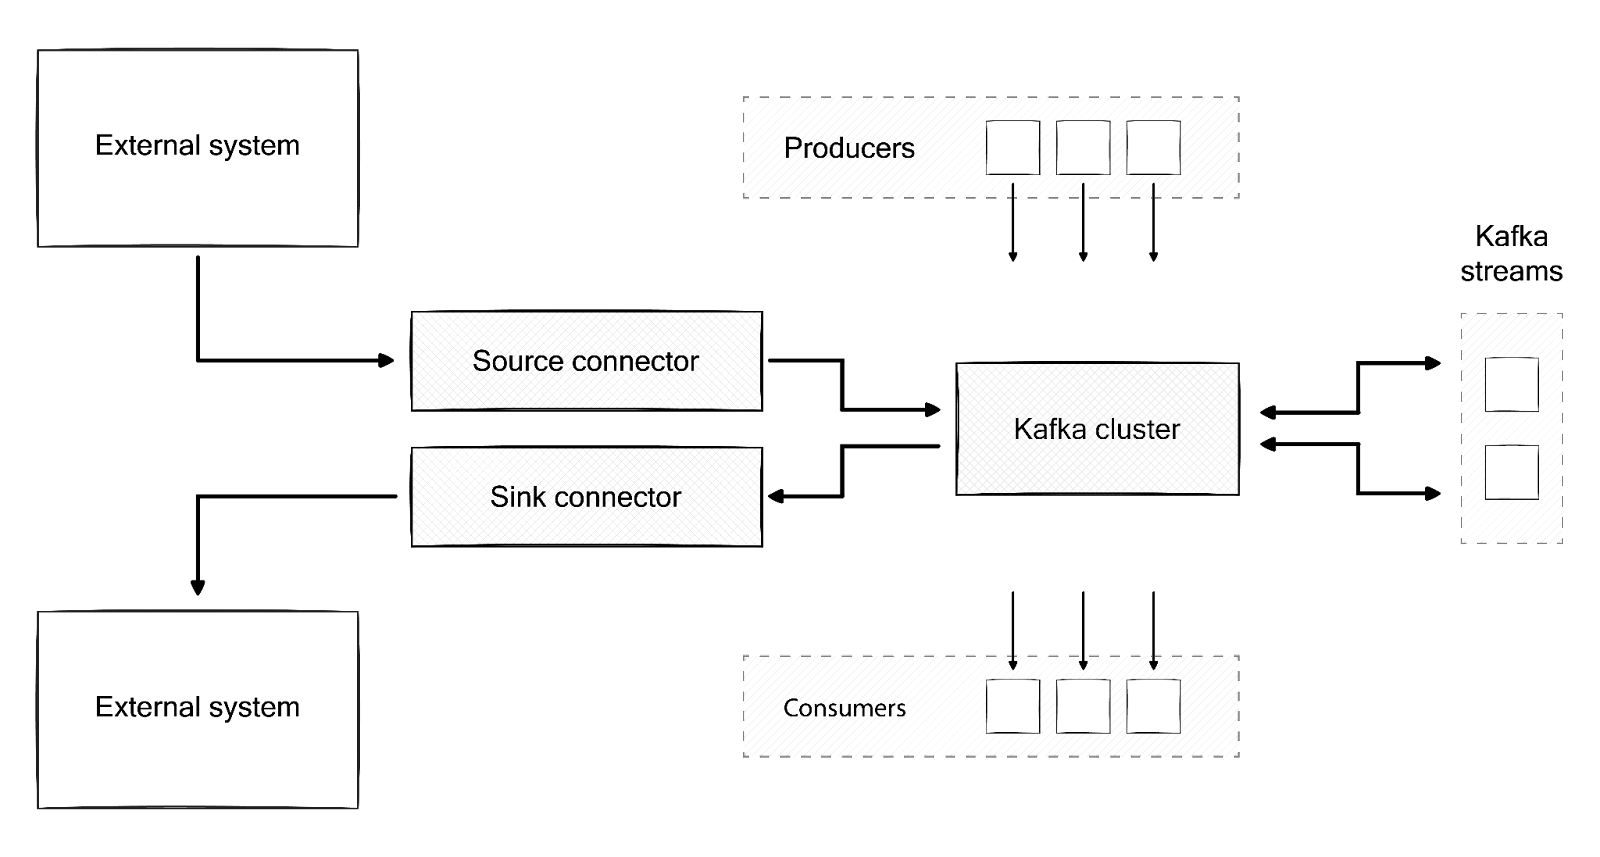 The core components that connect to Kafka and the data flow between them